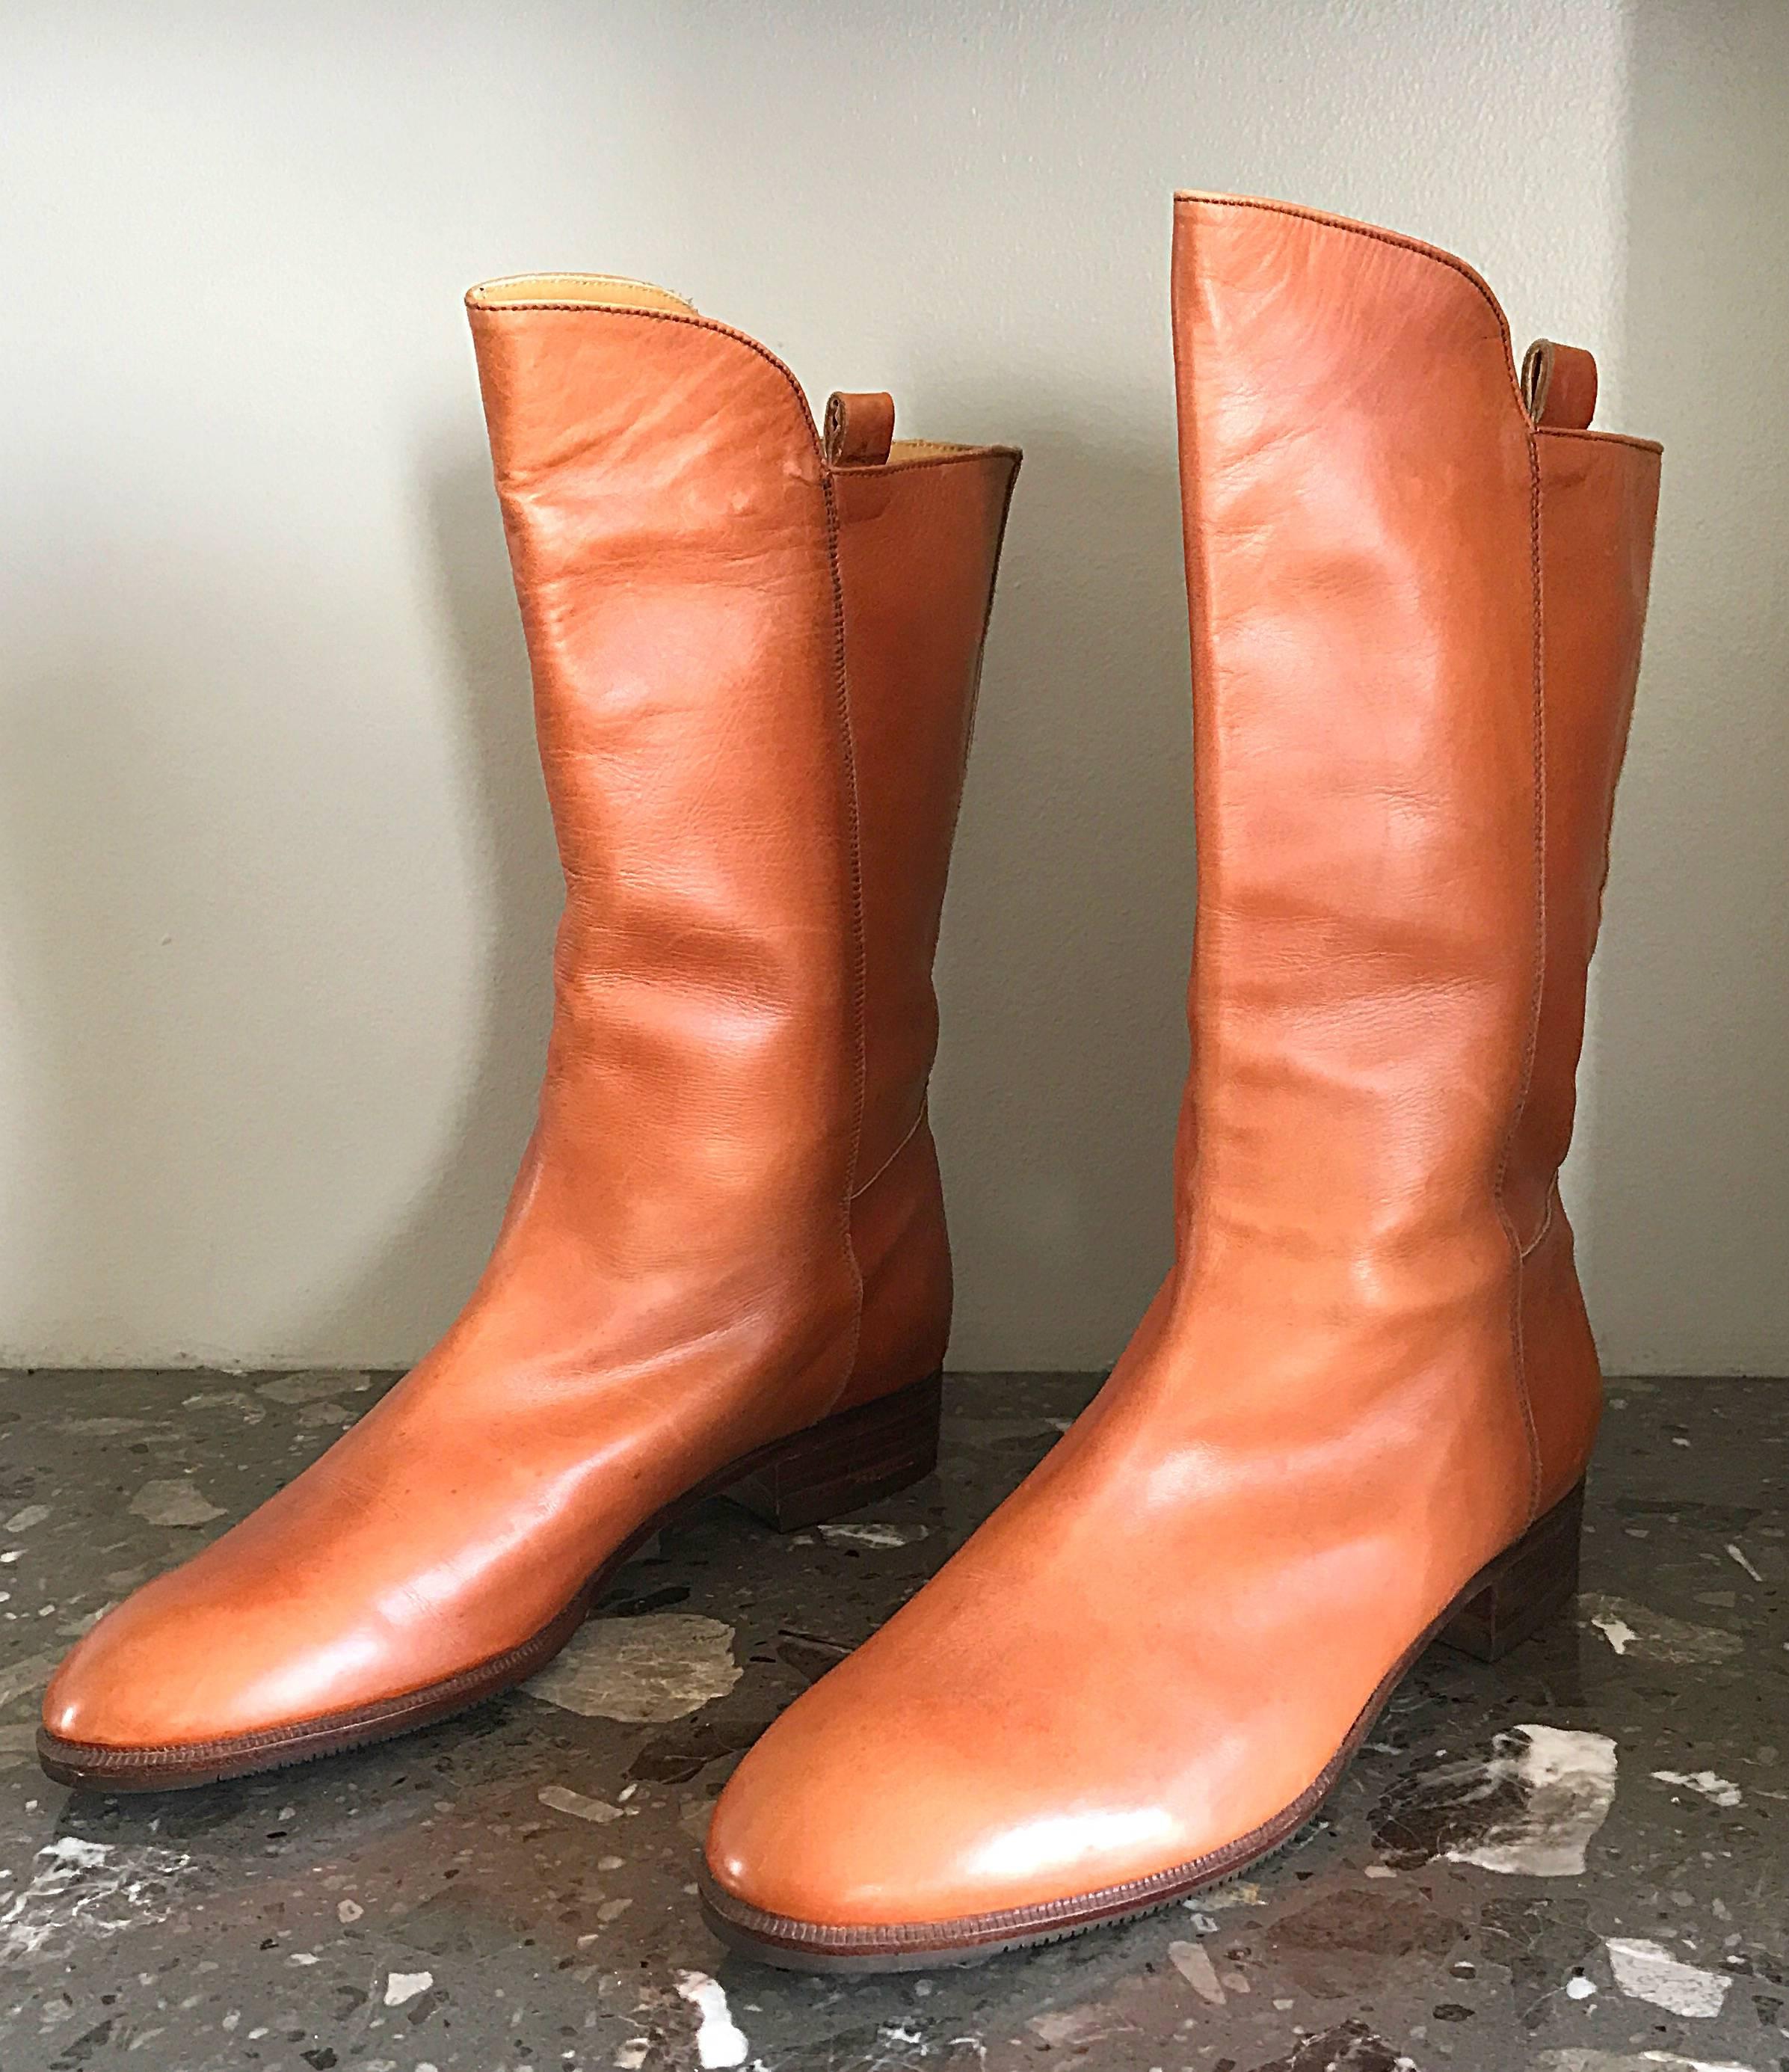 New 1980 Perry Ellis Size 6 Tan Saddle Leather Deadstock Calf Booties Boots en vente 3